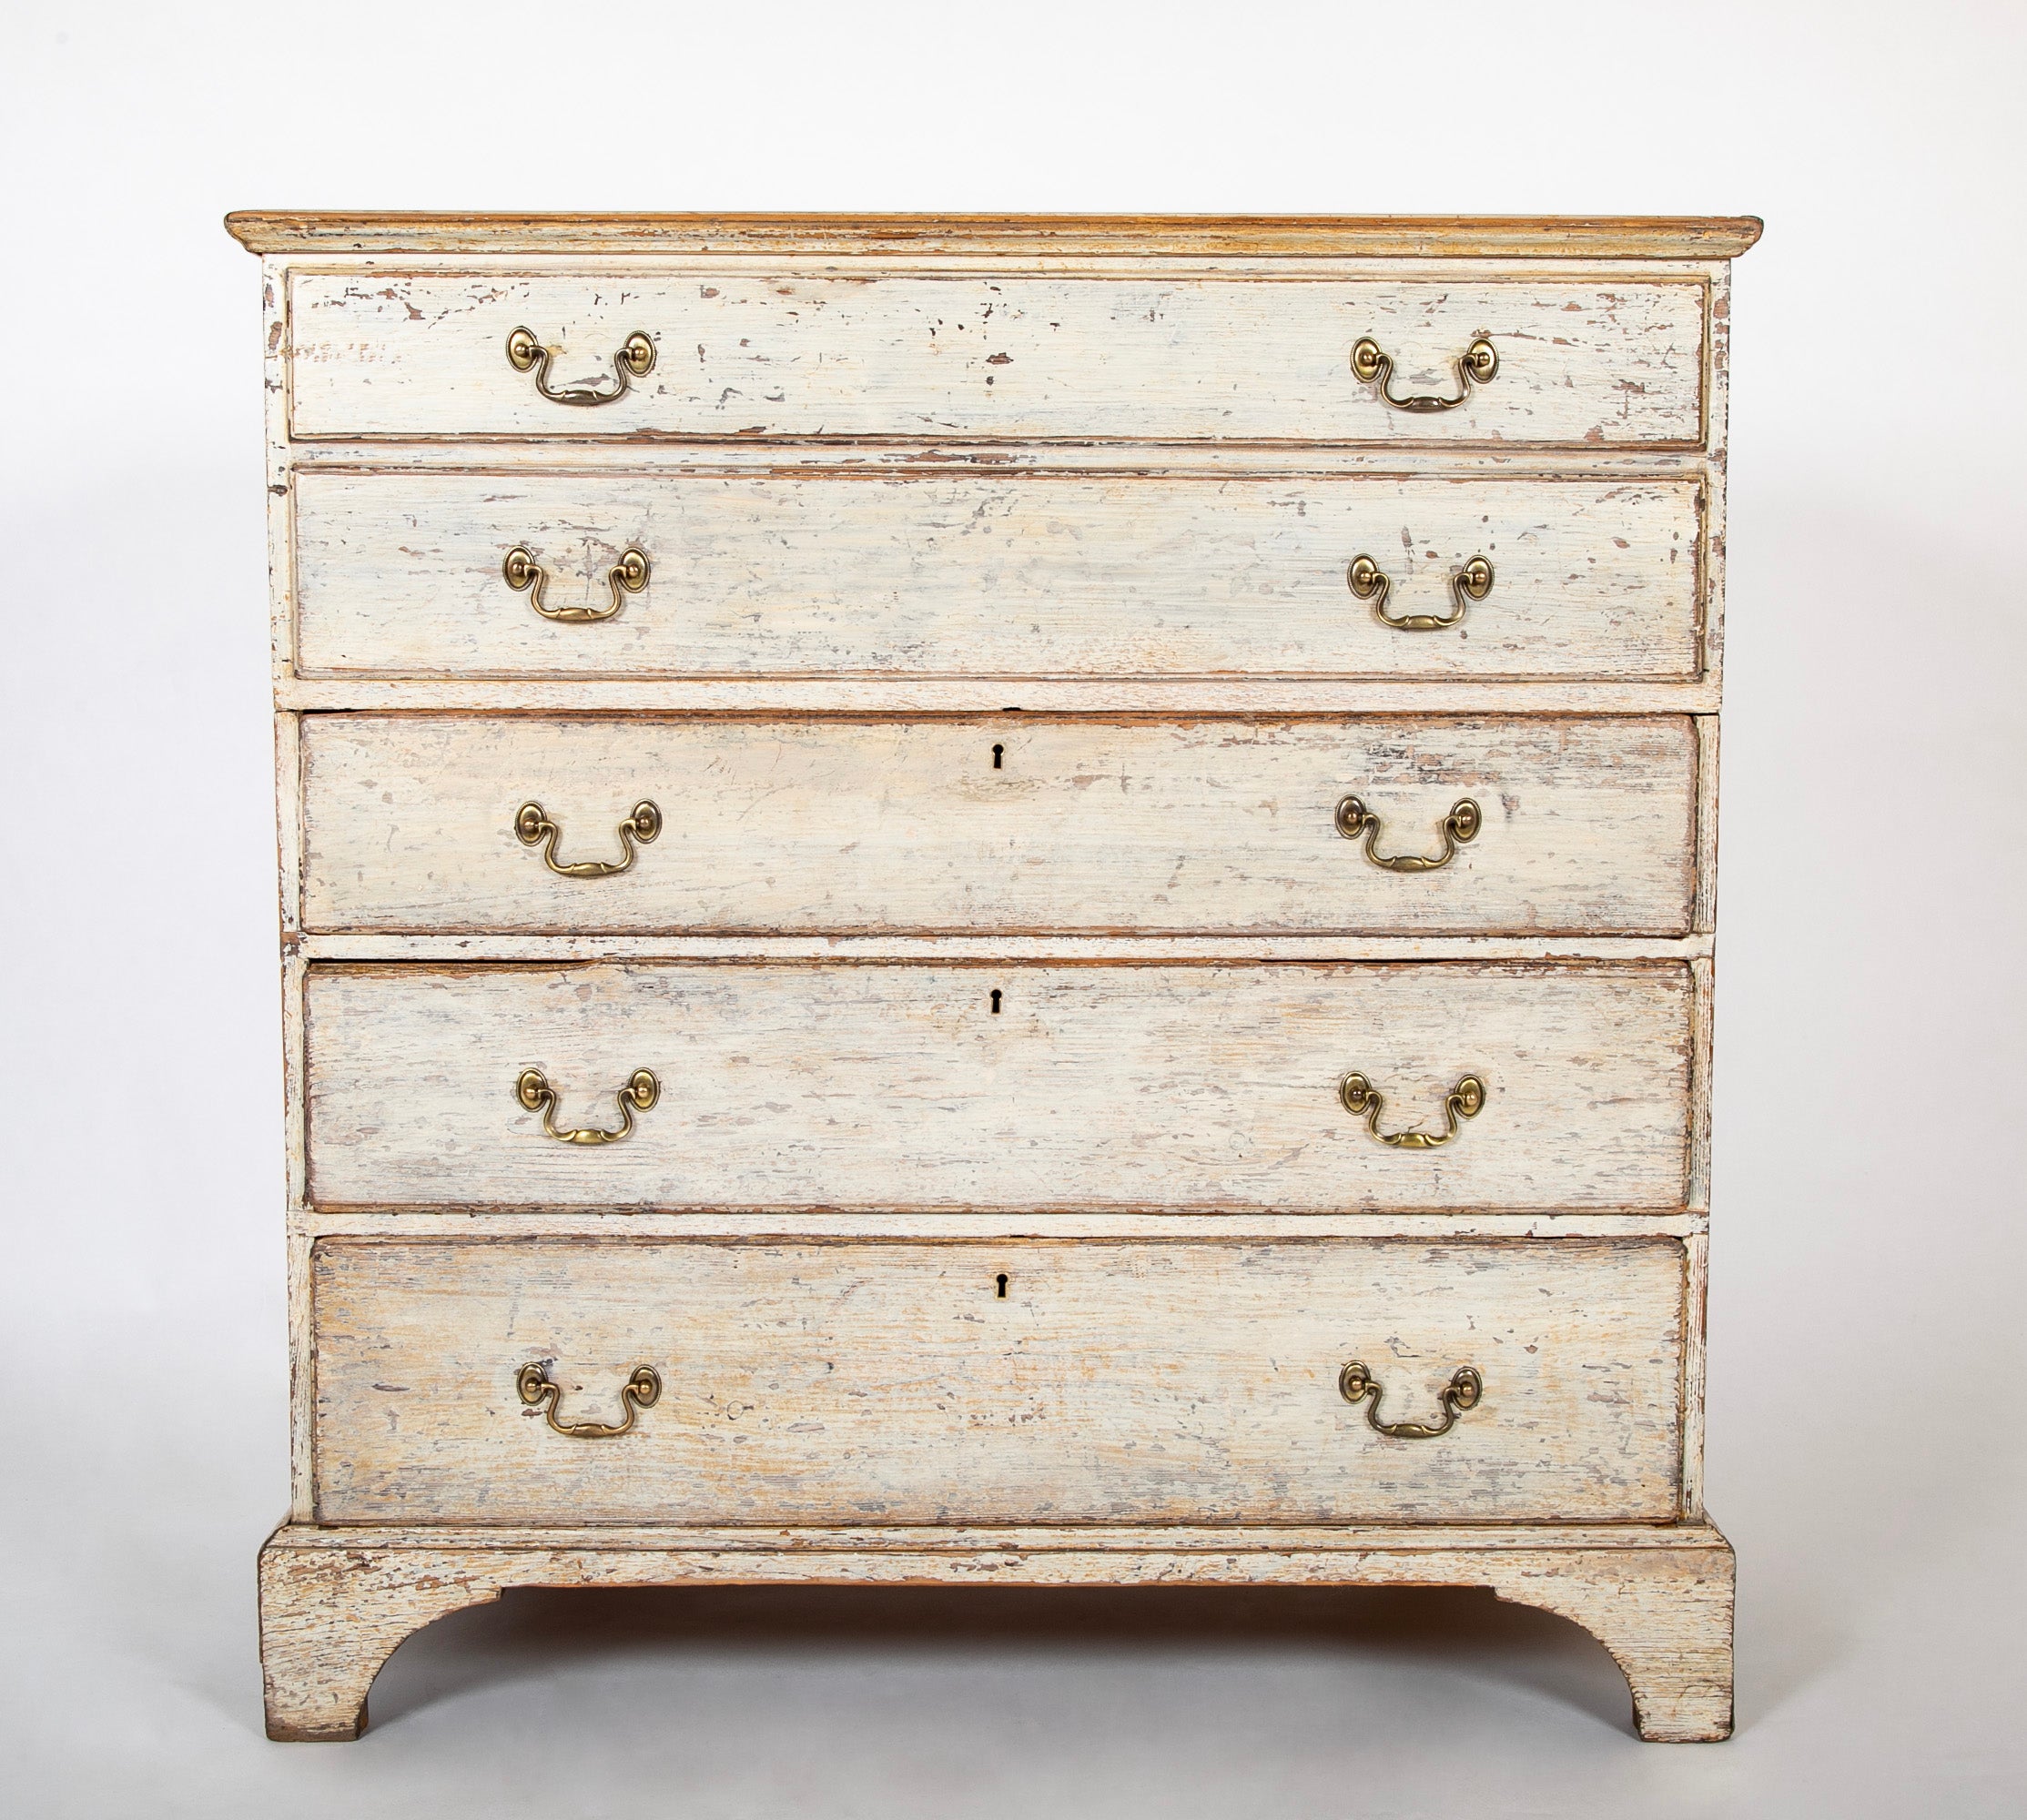 New England White Painted Blanket Chest